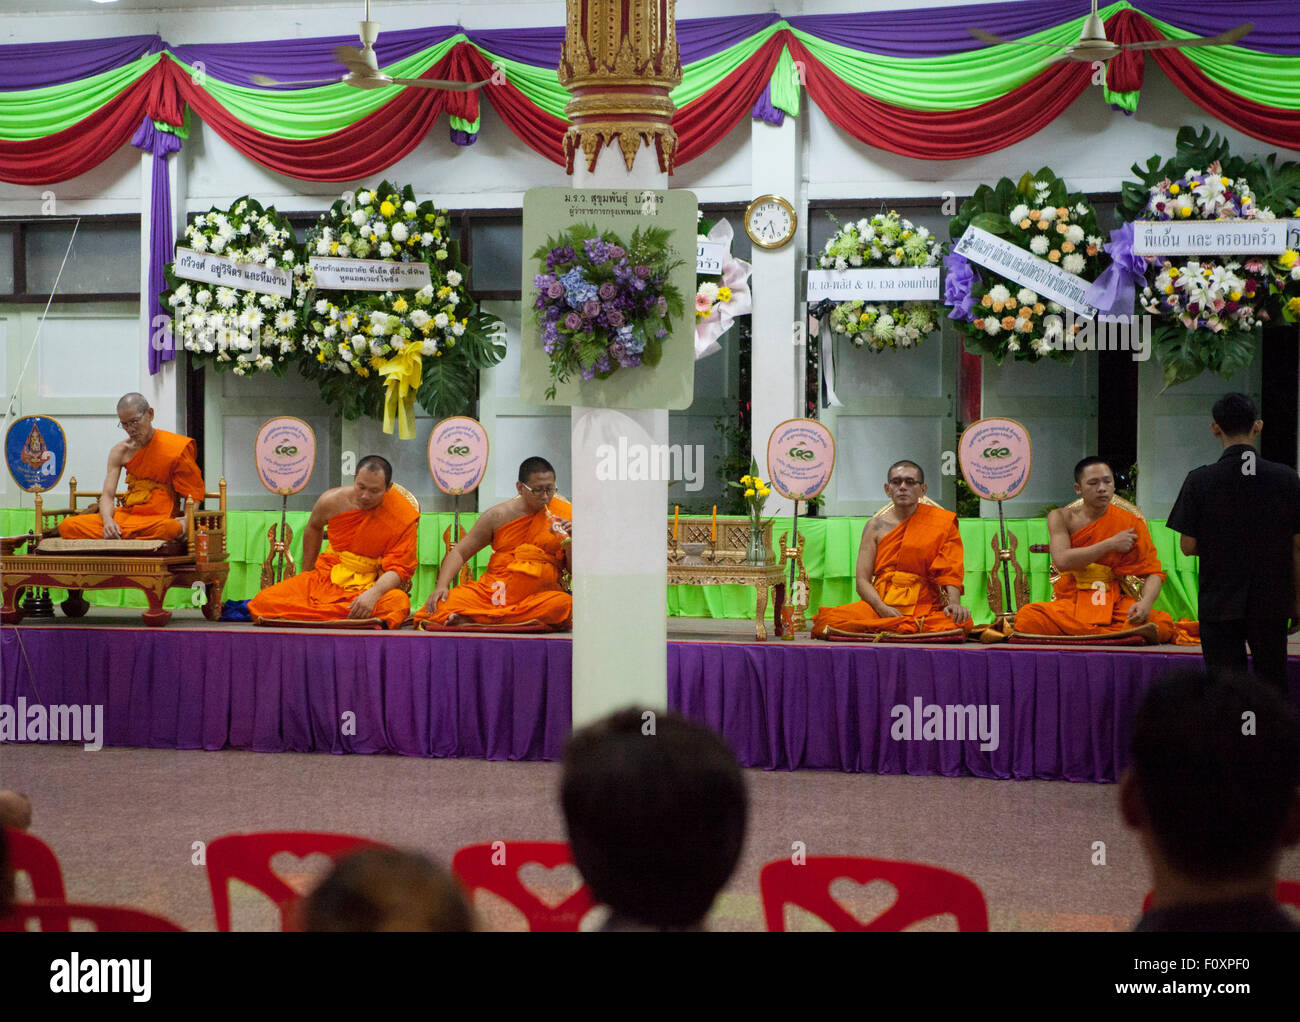 Monks chant during funeral services  for Yutnarong Singro at Wat Bangna Nok in Bangkok Thailand.  Three days after a bomb exploded killing him close to the Erawan shrine in central Chidlom district. At least 20 people died and 125 were injured in the attack. Stock Photo